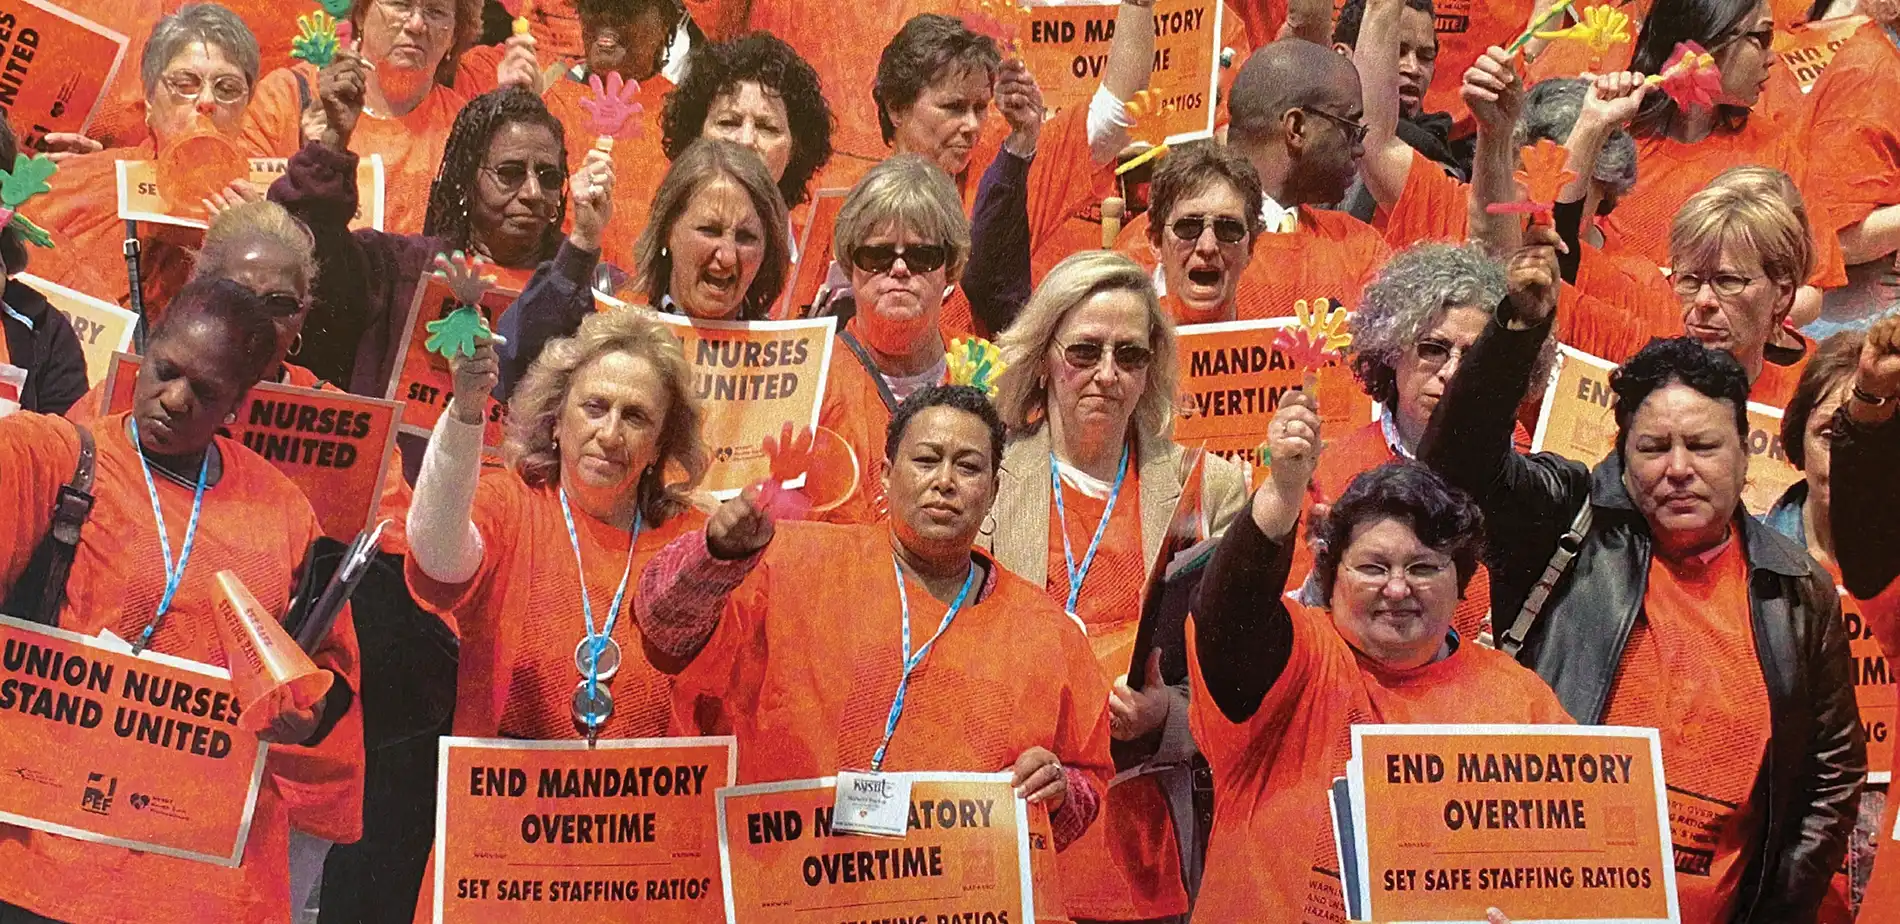 Crowd of Union Nurses in orange at a rally